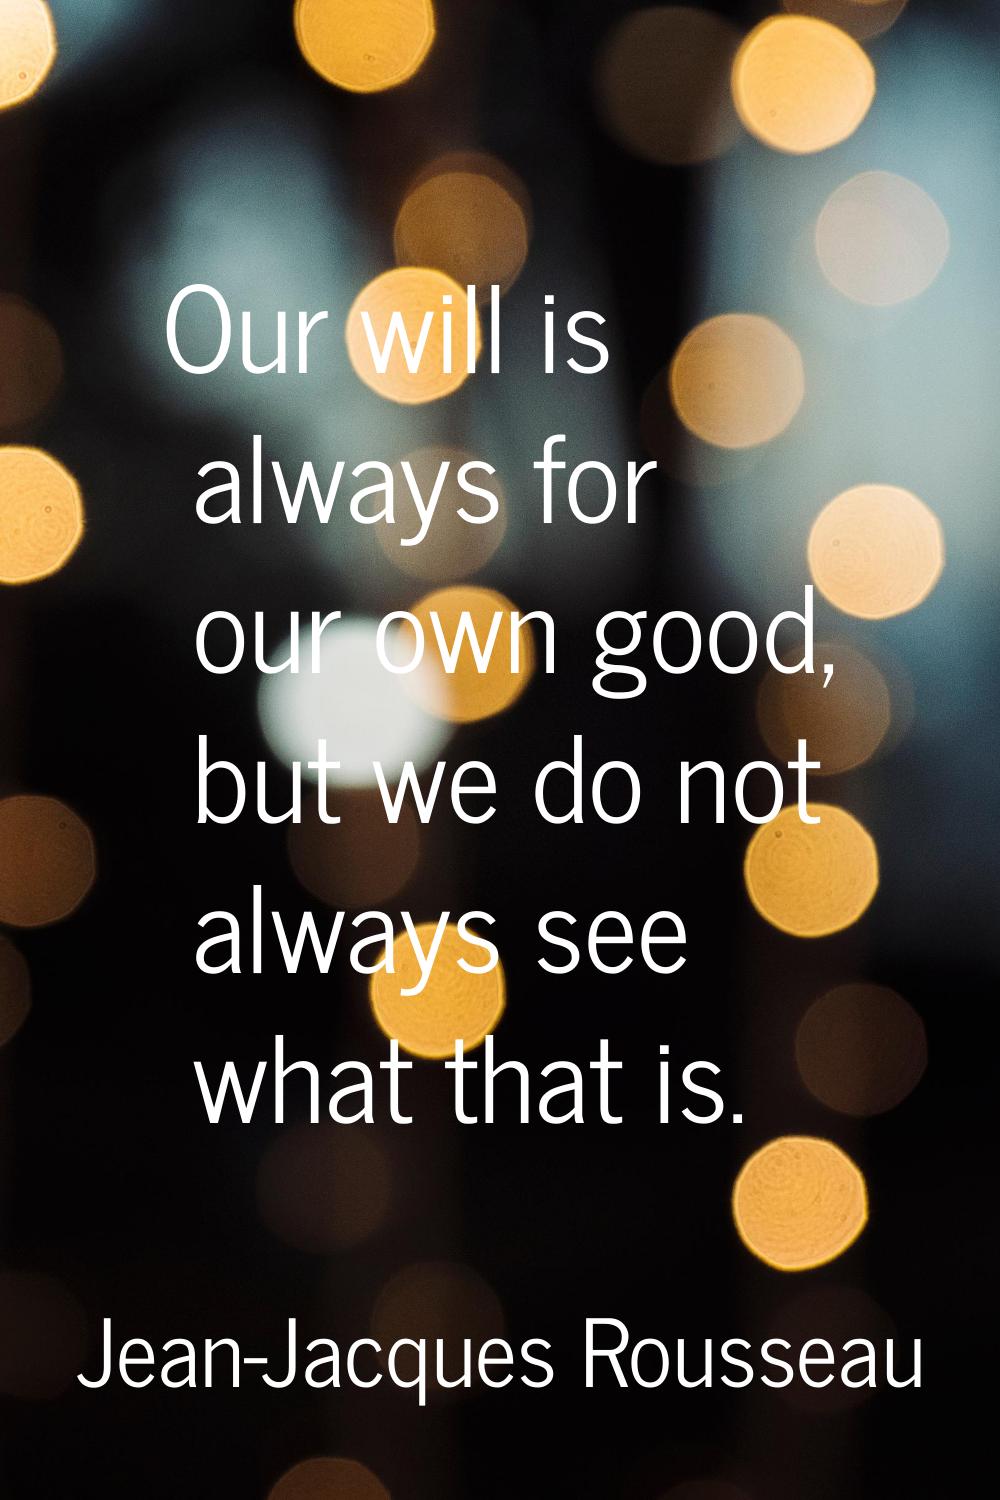 Our will is always for our own good, but we do not always see what that is.